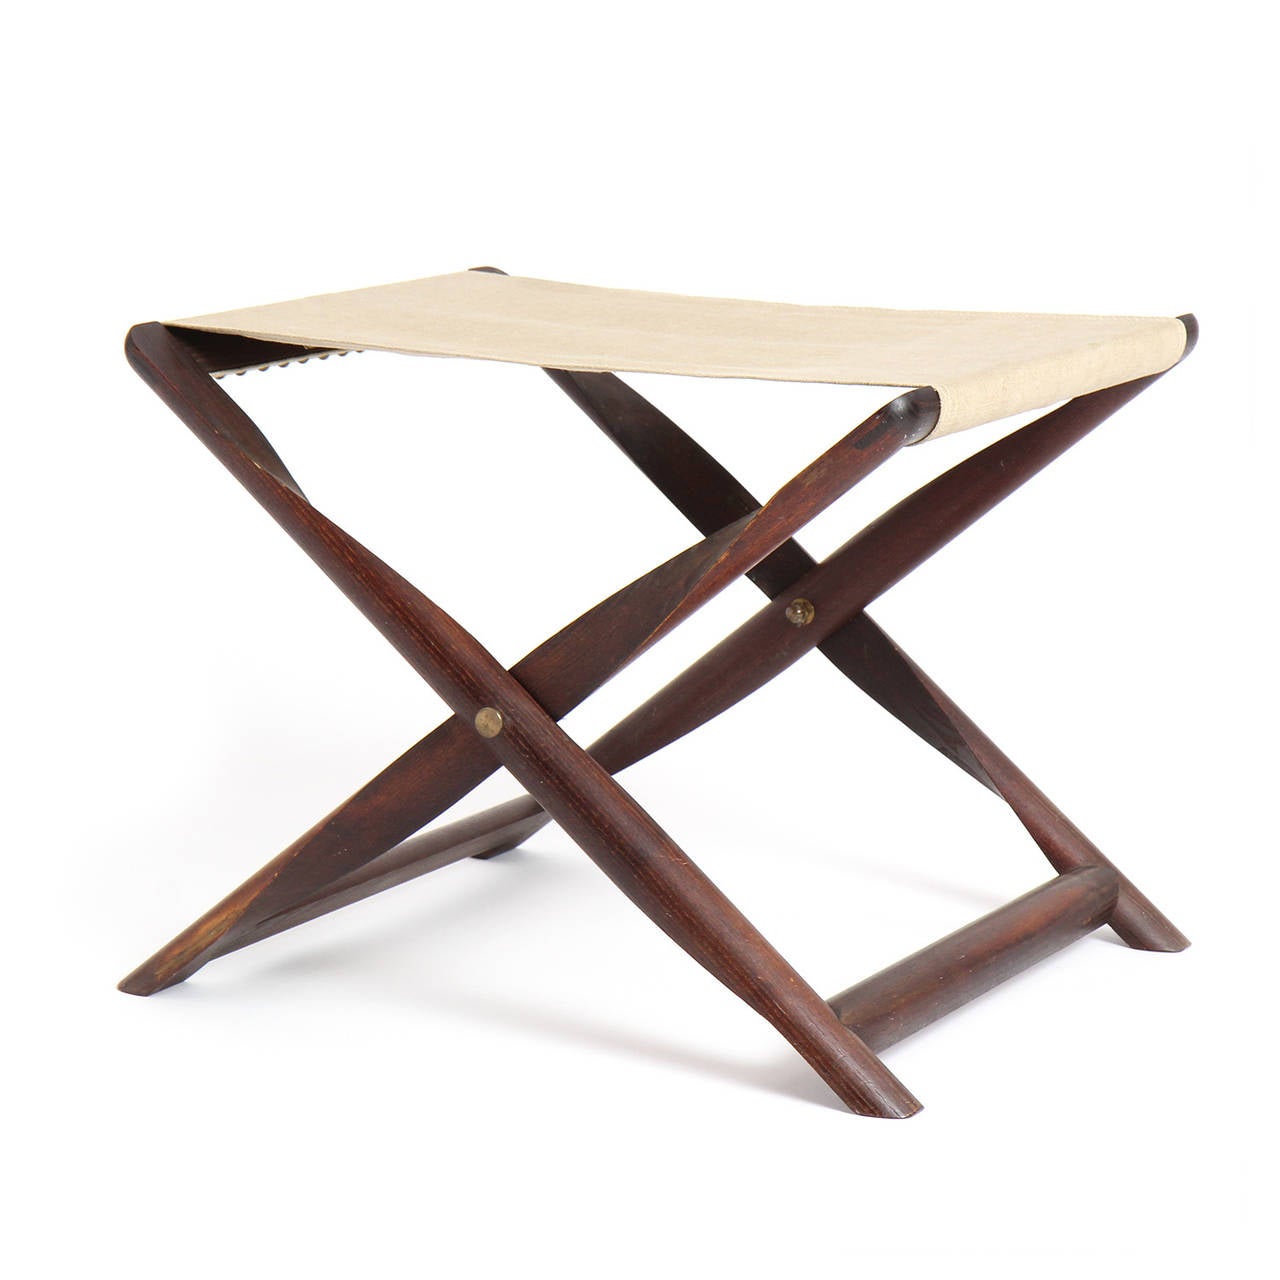 A beautiful hand crafted folding stool in rich mahogany having turned and sculpted propellor shaped intersecting legs with fine brass detailing and a hand stitched natural canvas sling seat attached with brass large head nails.